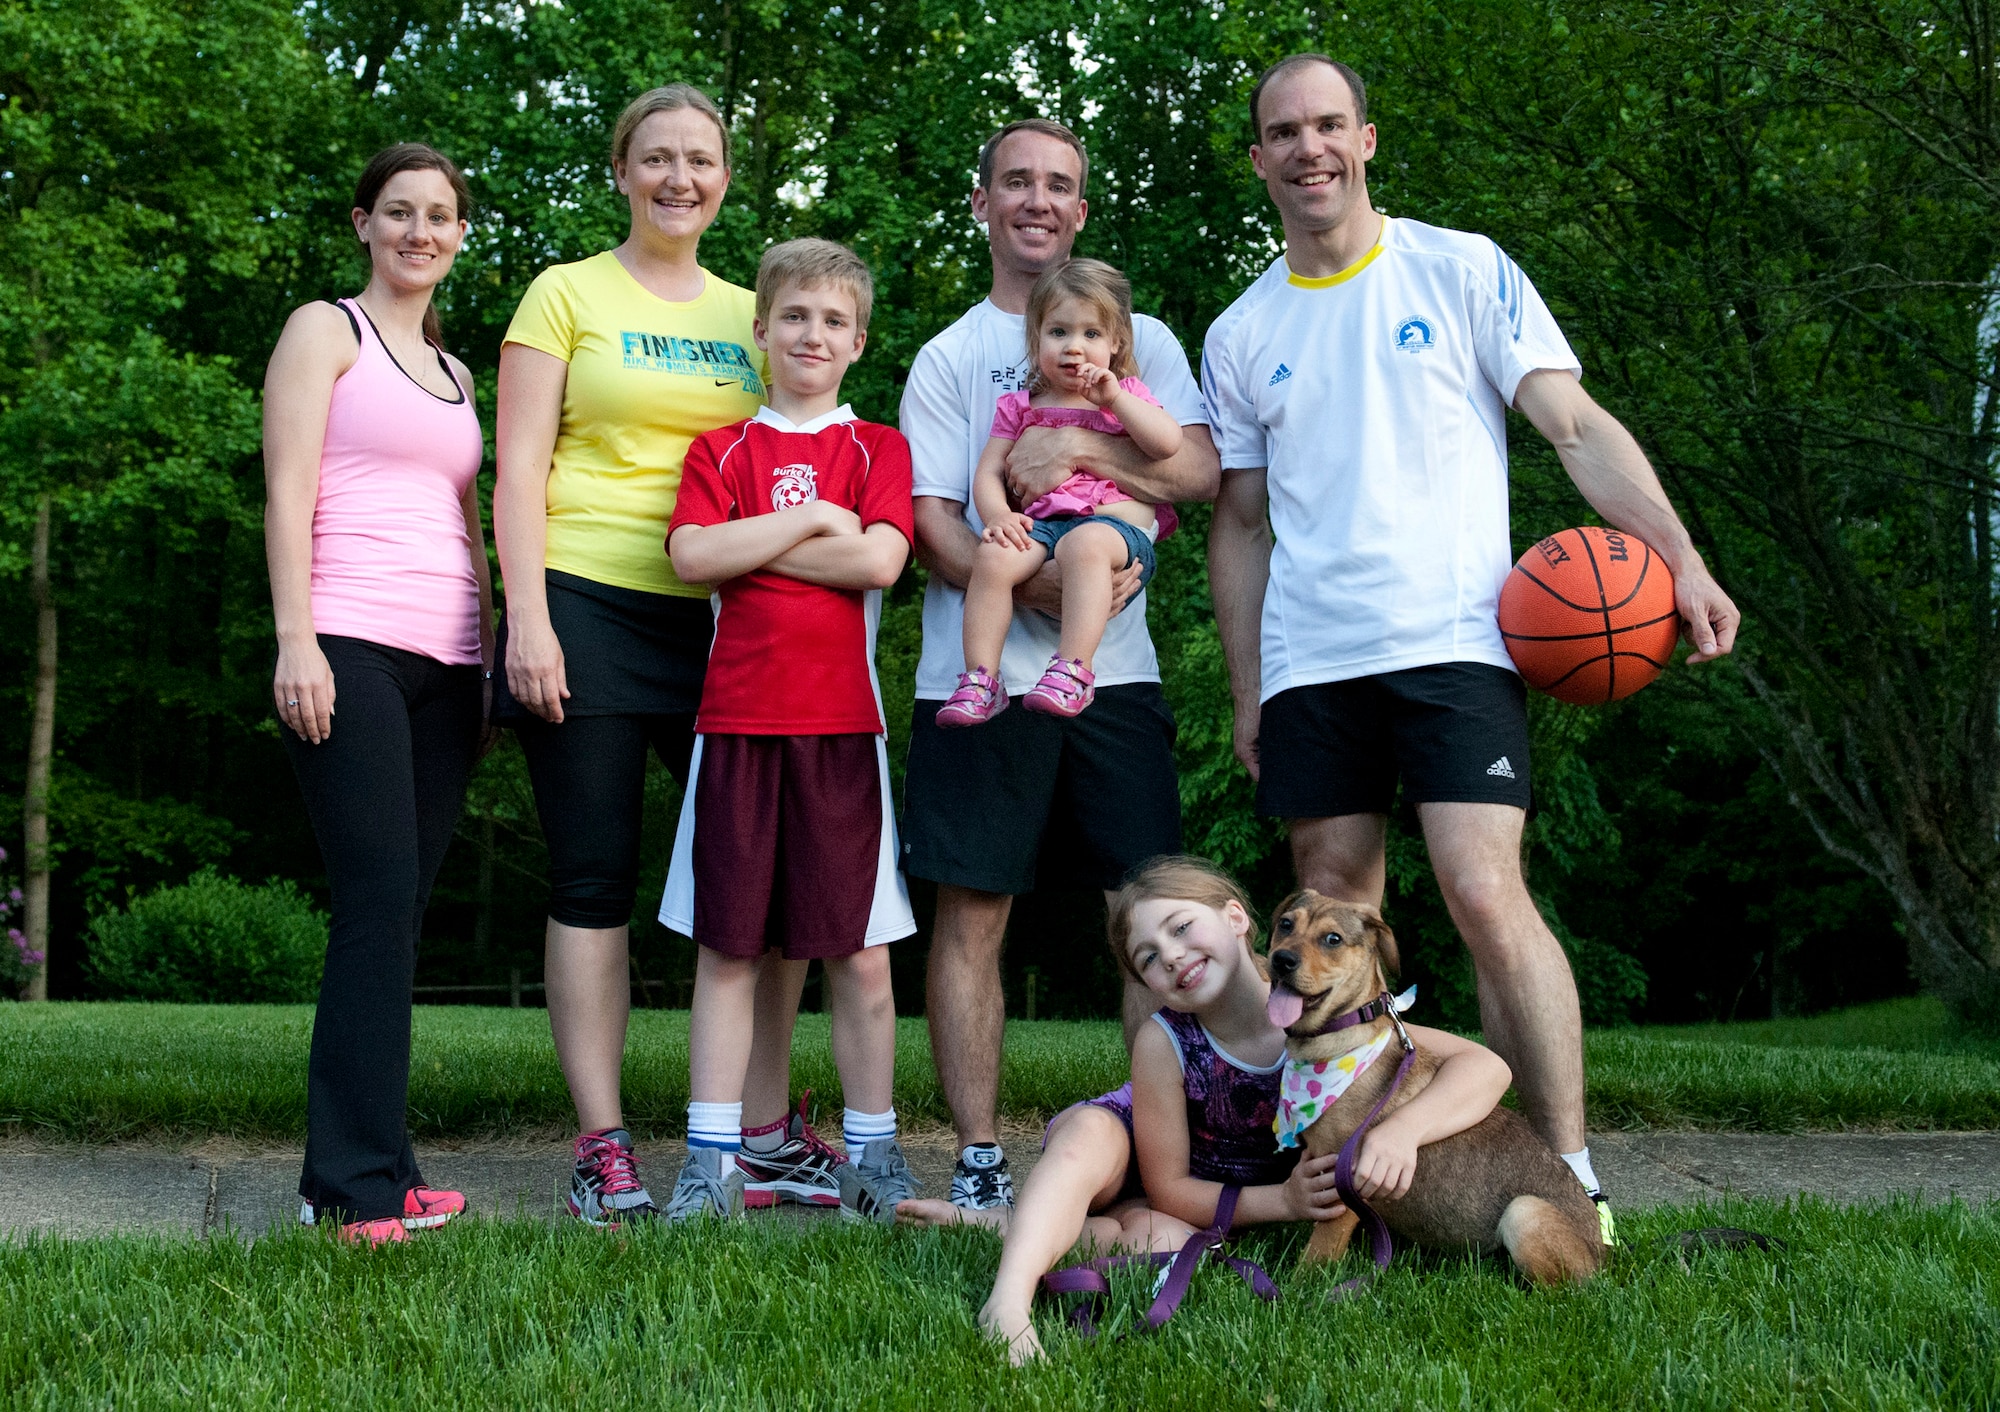 The Novotny family poses for a family photo, during a family gathering, May 20, 2013 in Fairfax Va. The Novotny family shares a healthy lifestyle in sports and running as a family. (U.S. Air Force photo by Senior Airman Carlin Leslie)